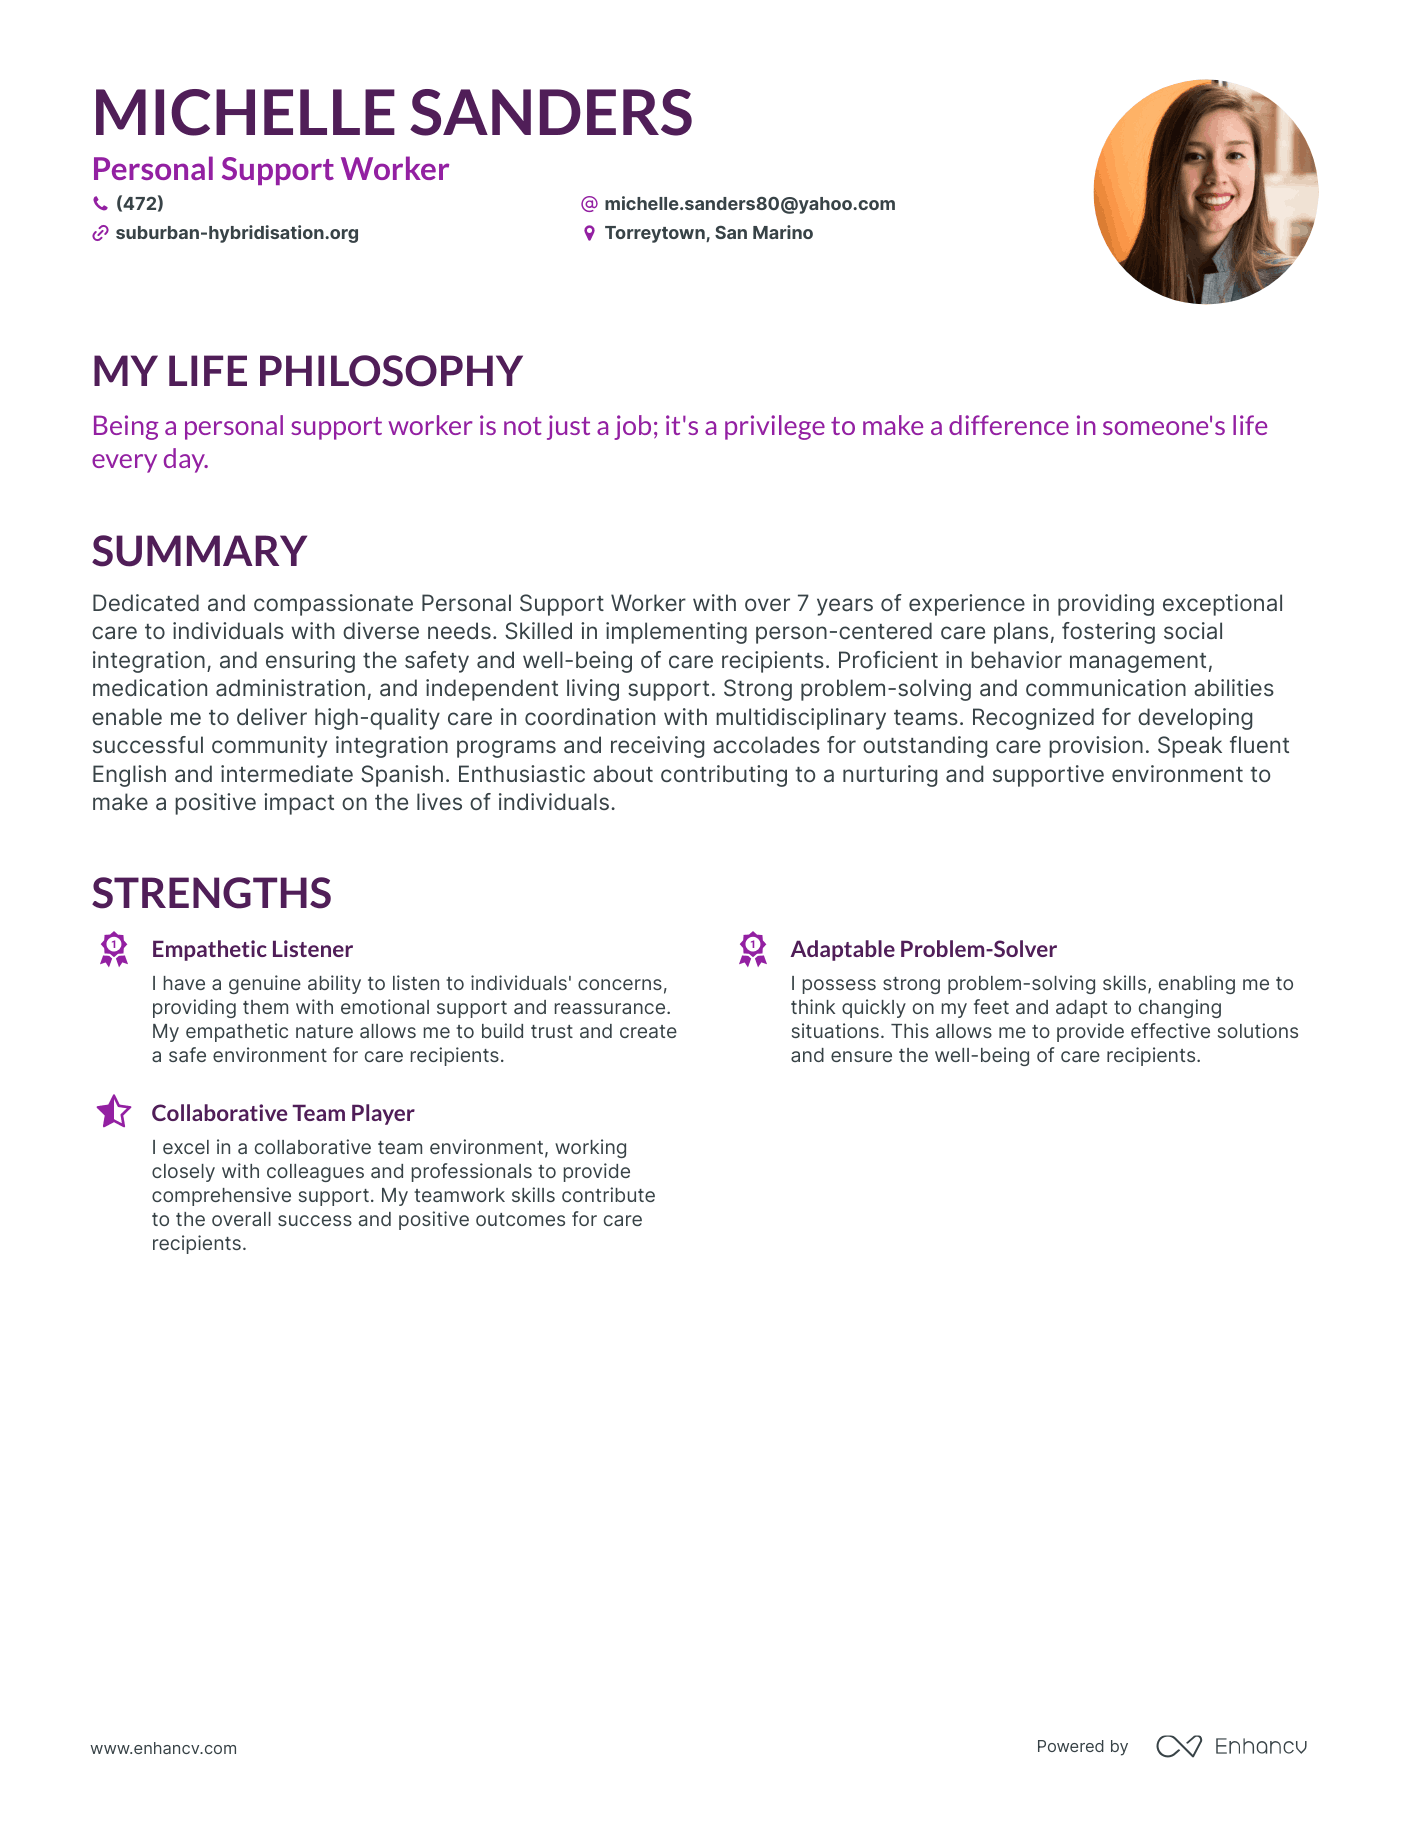 personal support worker resume sample